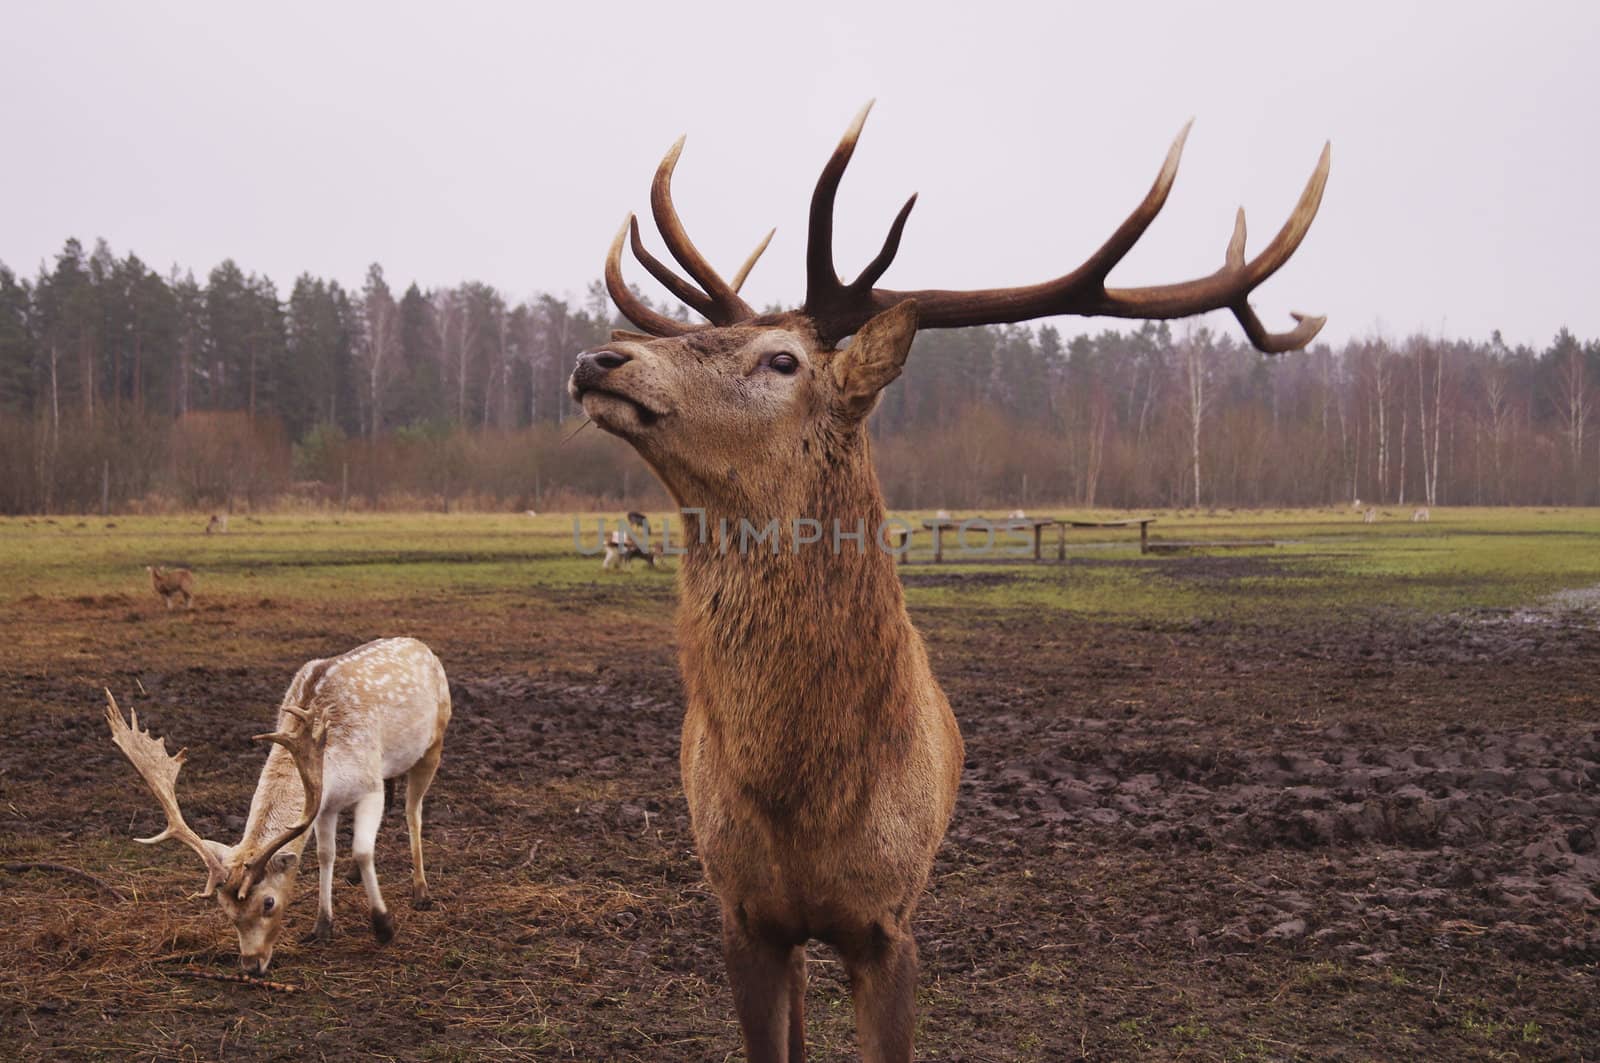 Dear stag in nature